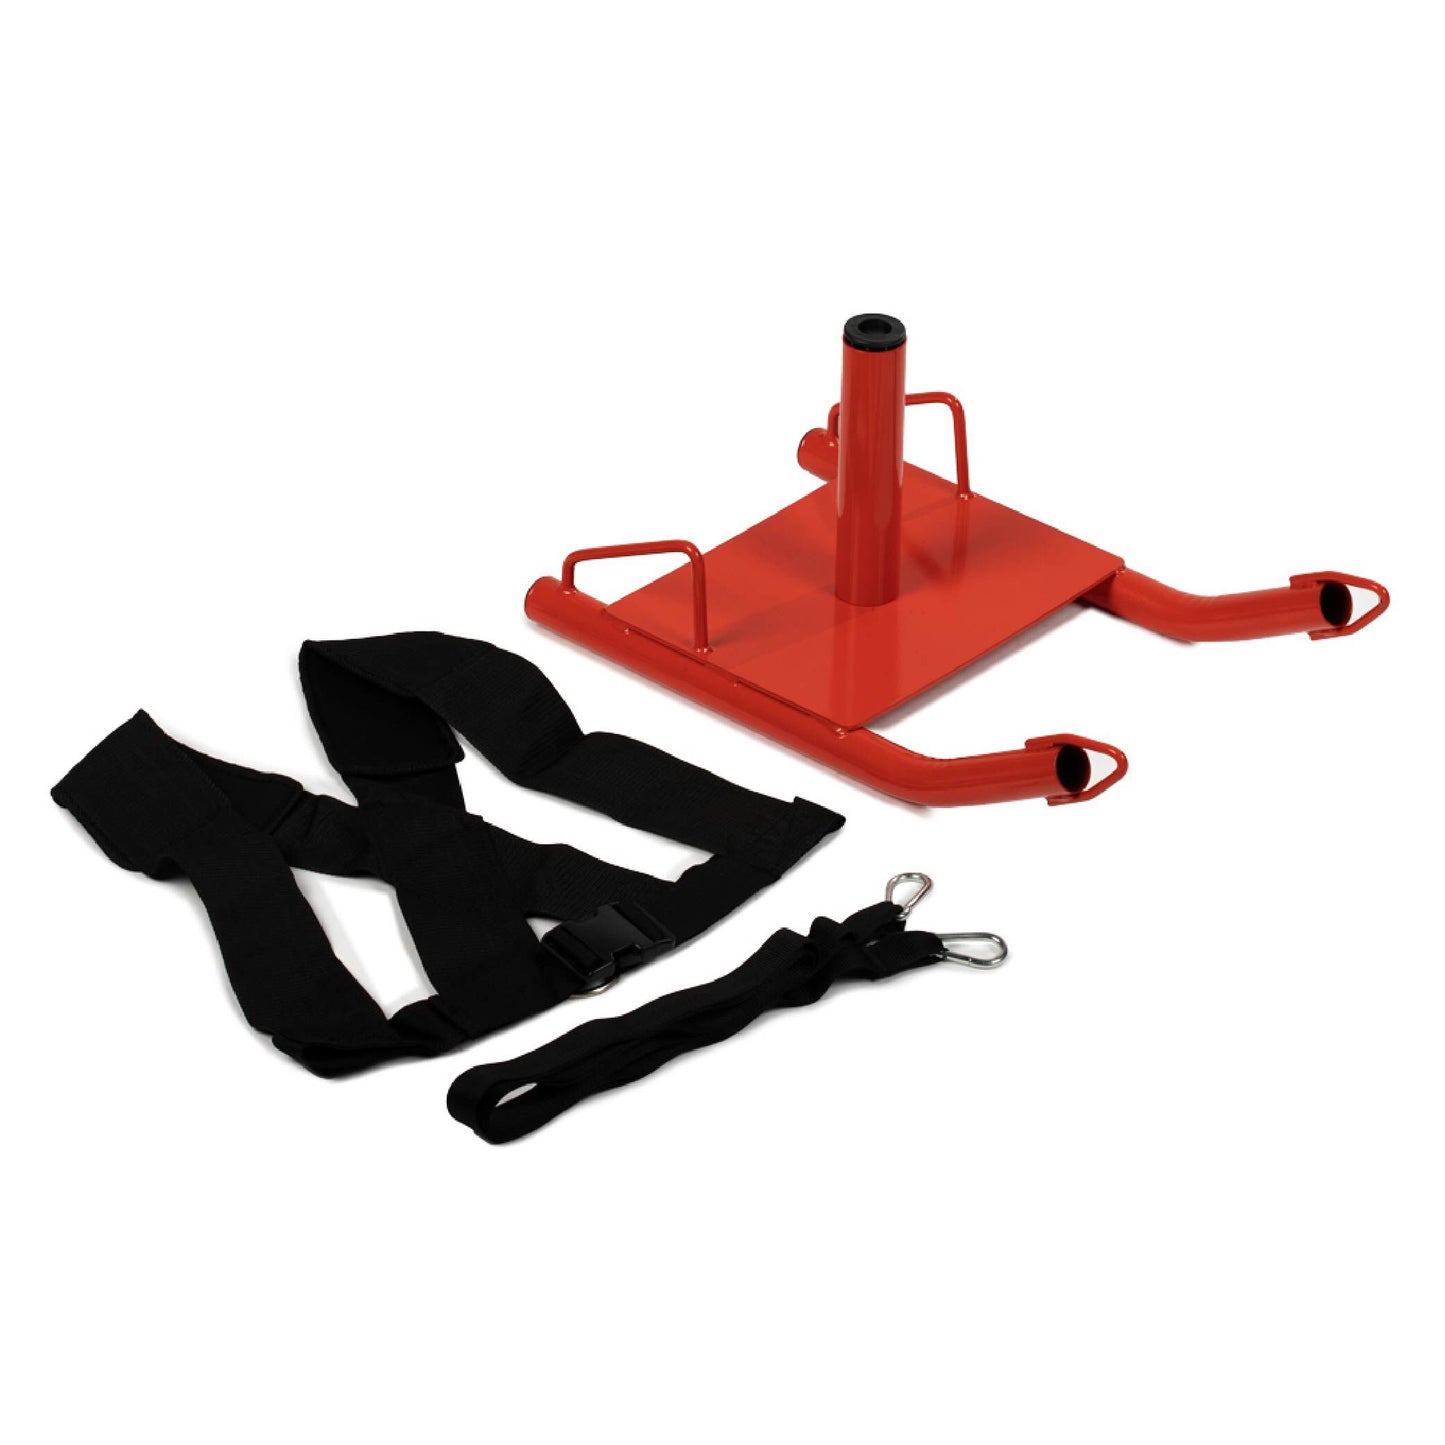 Power Speed Sled with Deluxe Harness - view 1